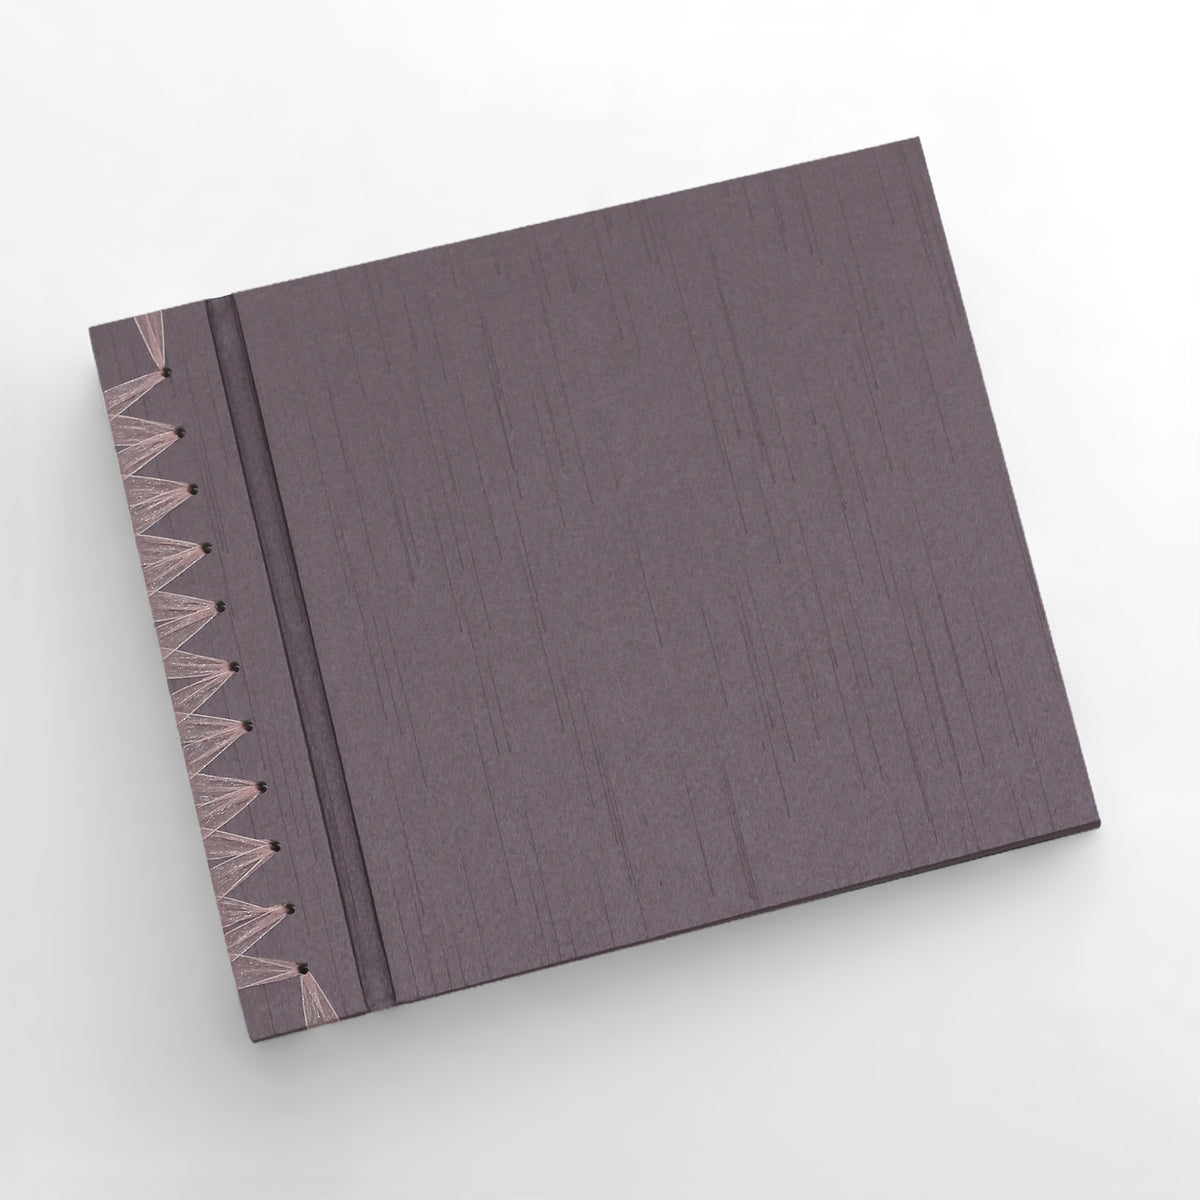 Deluxe 12 x 15 Paper Page Album | Cover: Amethyst Silk | Available Personalized